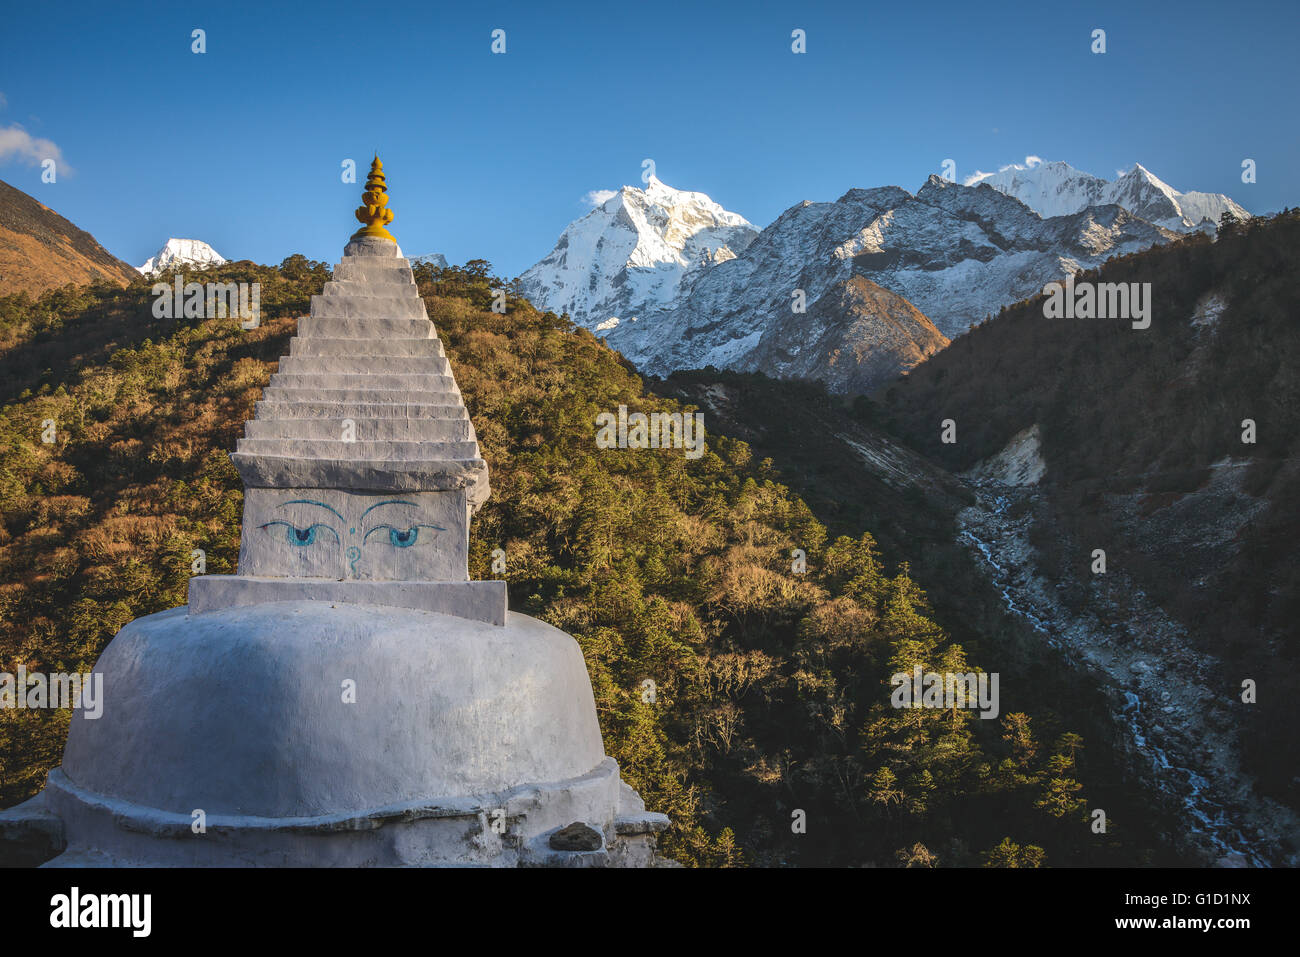 Stupa on the route to Mt Everest Stock Photo